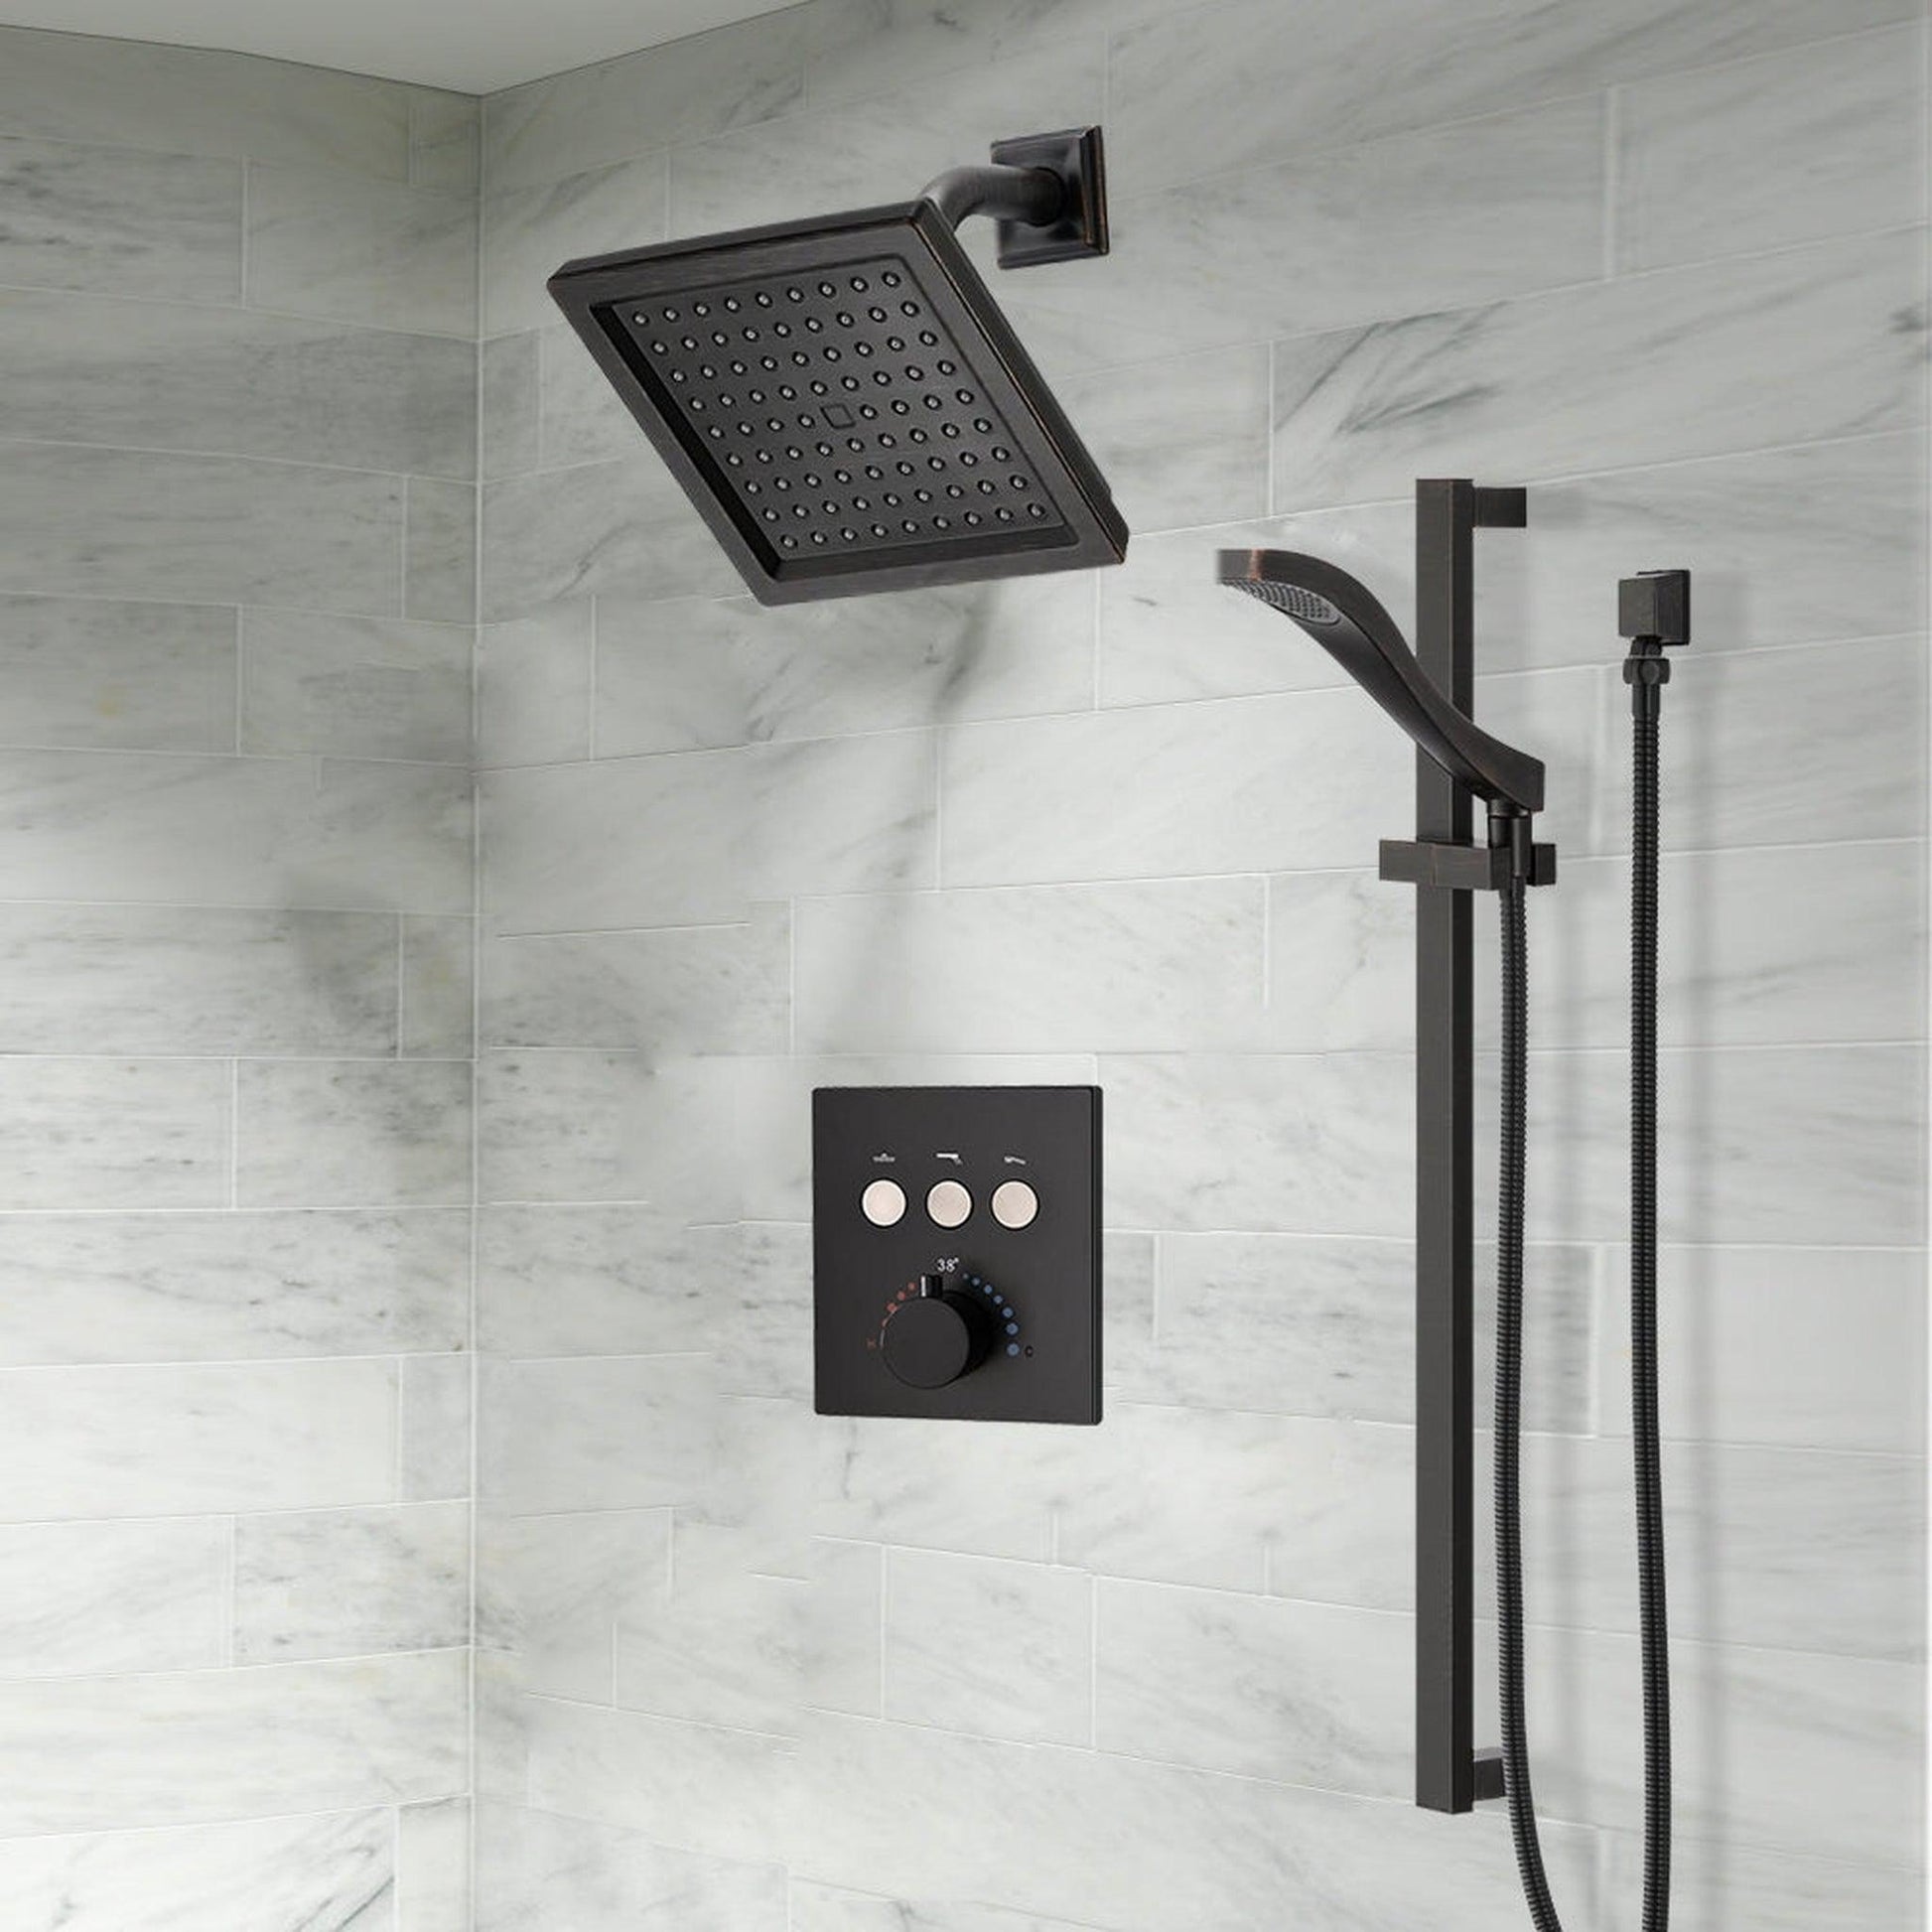 12 Matte Black Wall Mounted Rain Shower System with Rainfall Shower Head  Solid Brass